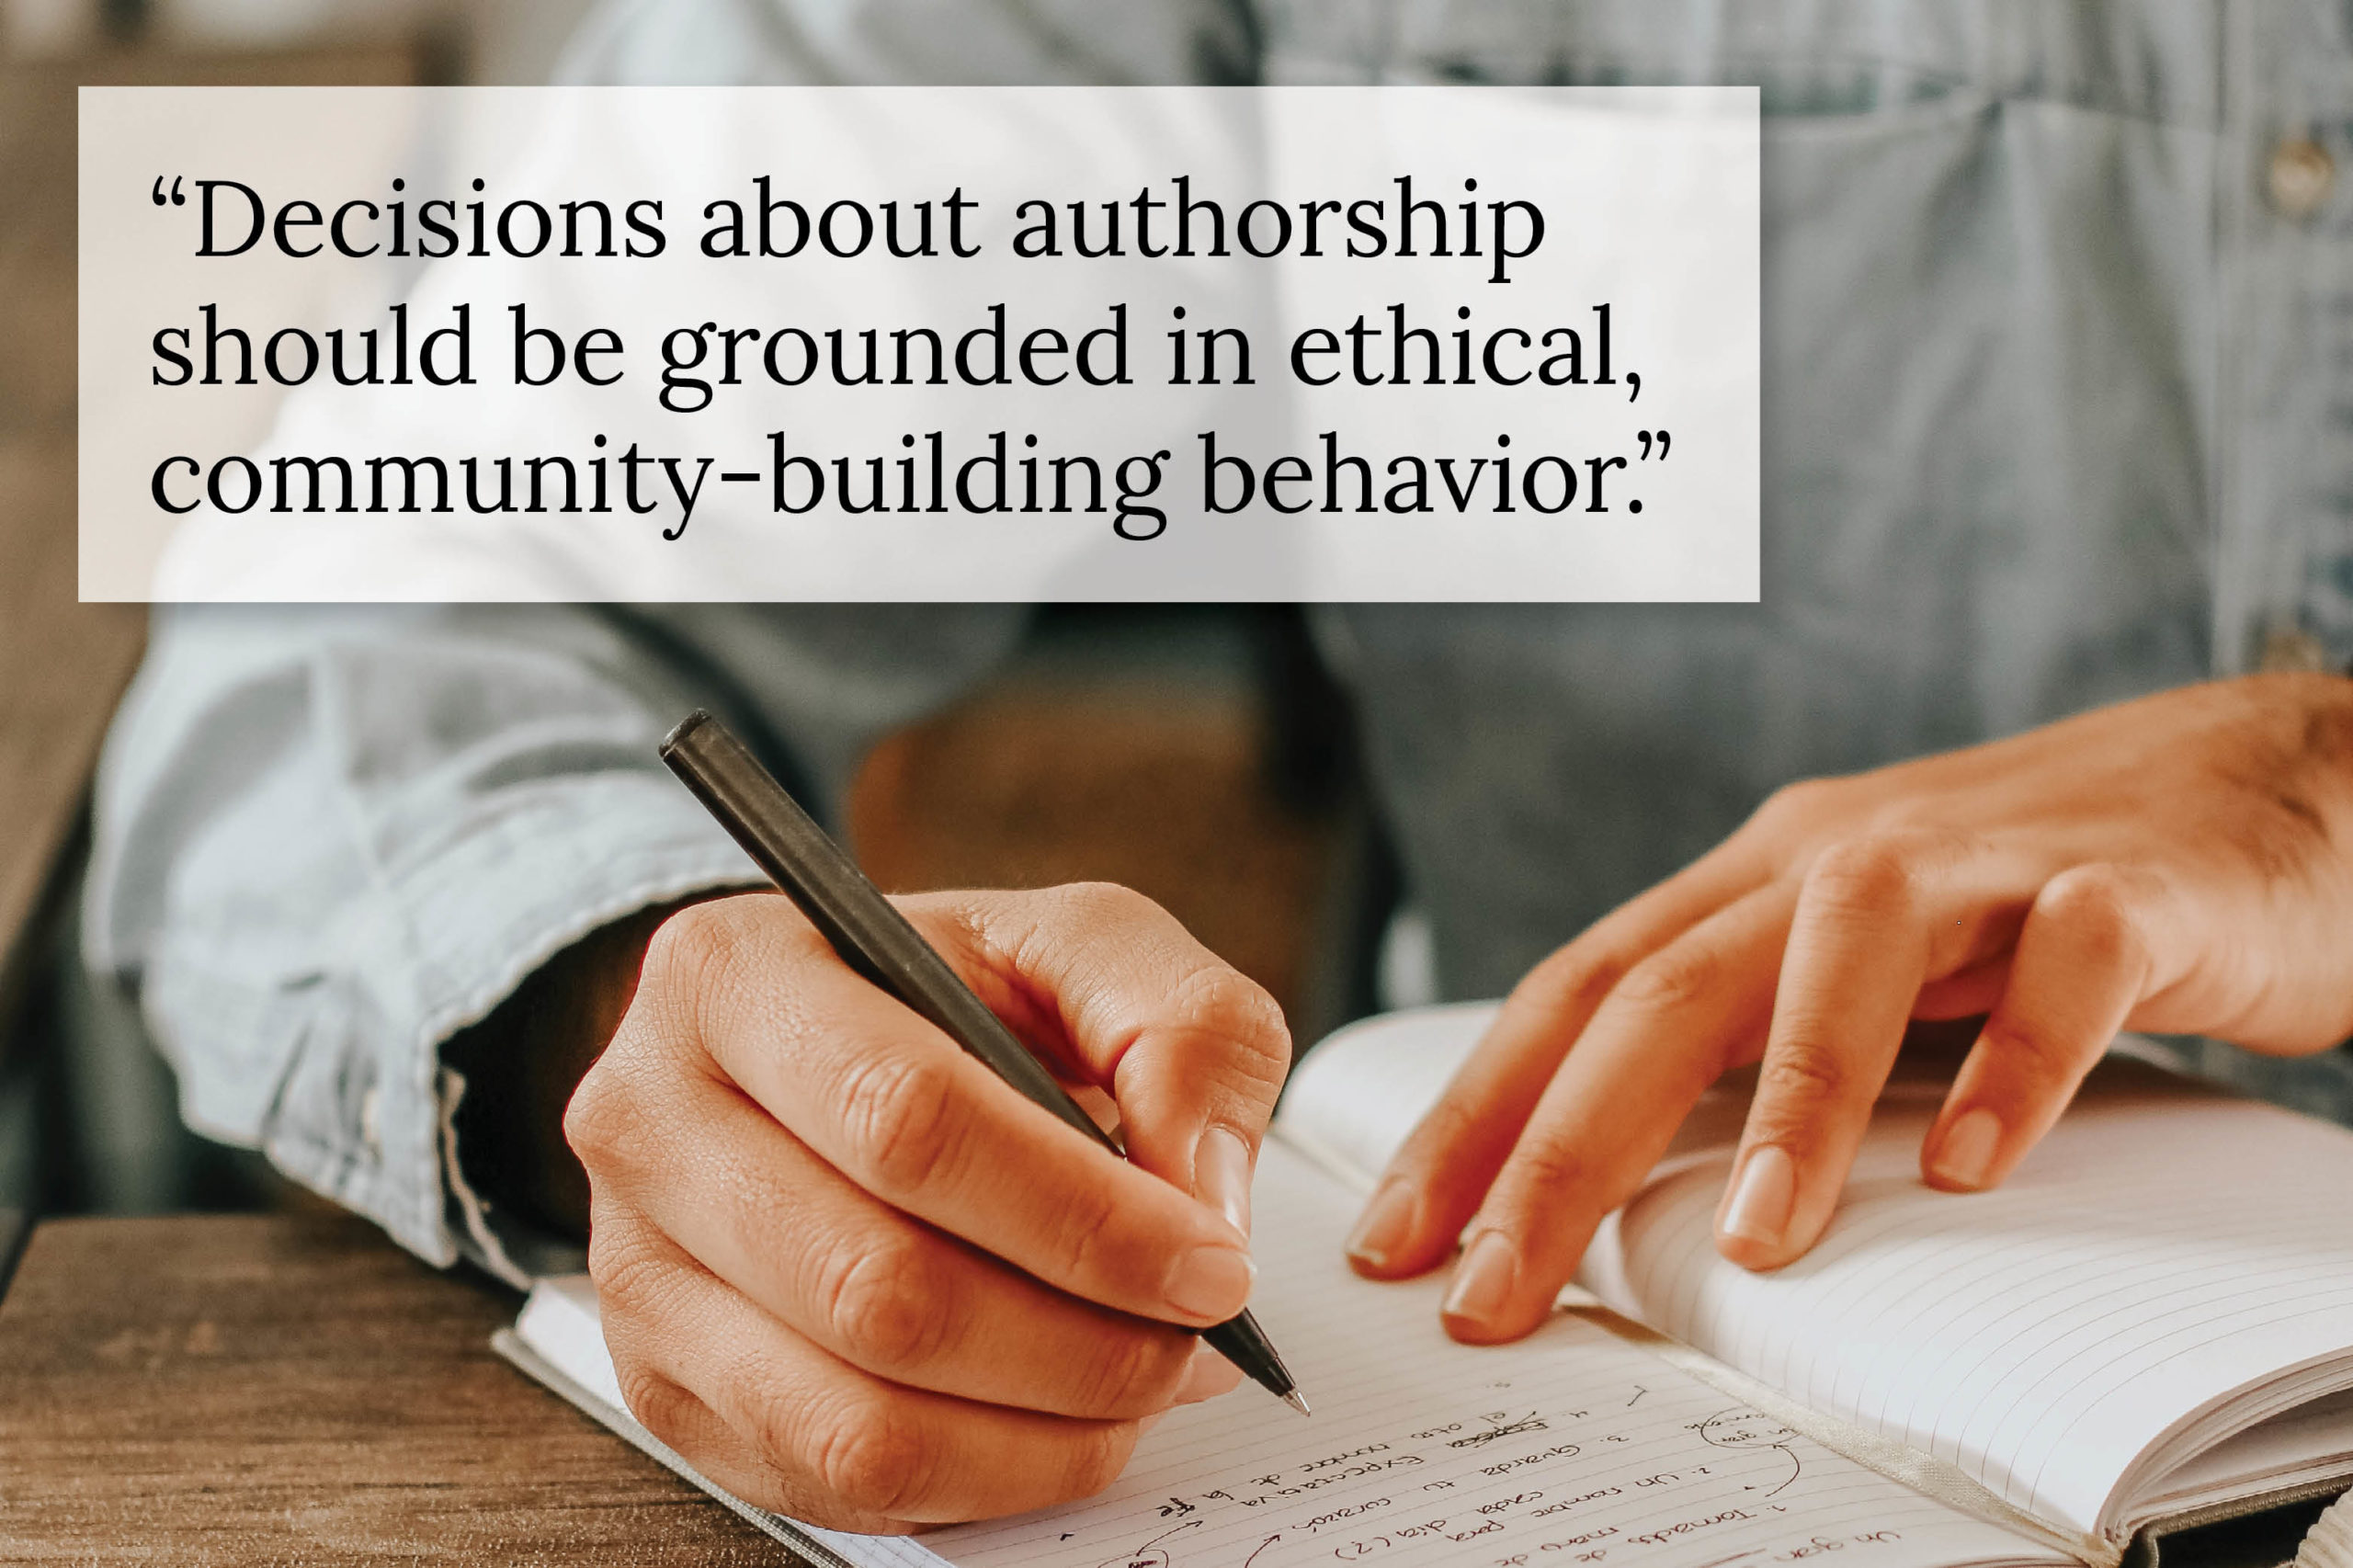 Man writing in notebook with text overlaid: "Decisions of authorship should be grounded in ethical, community-building behavior."